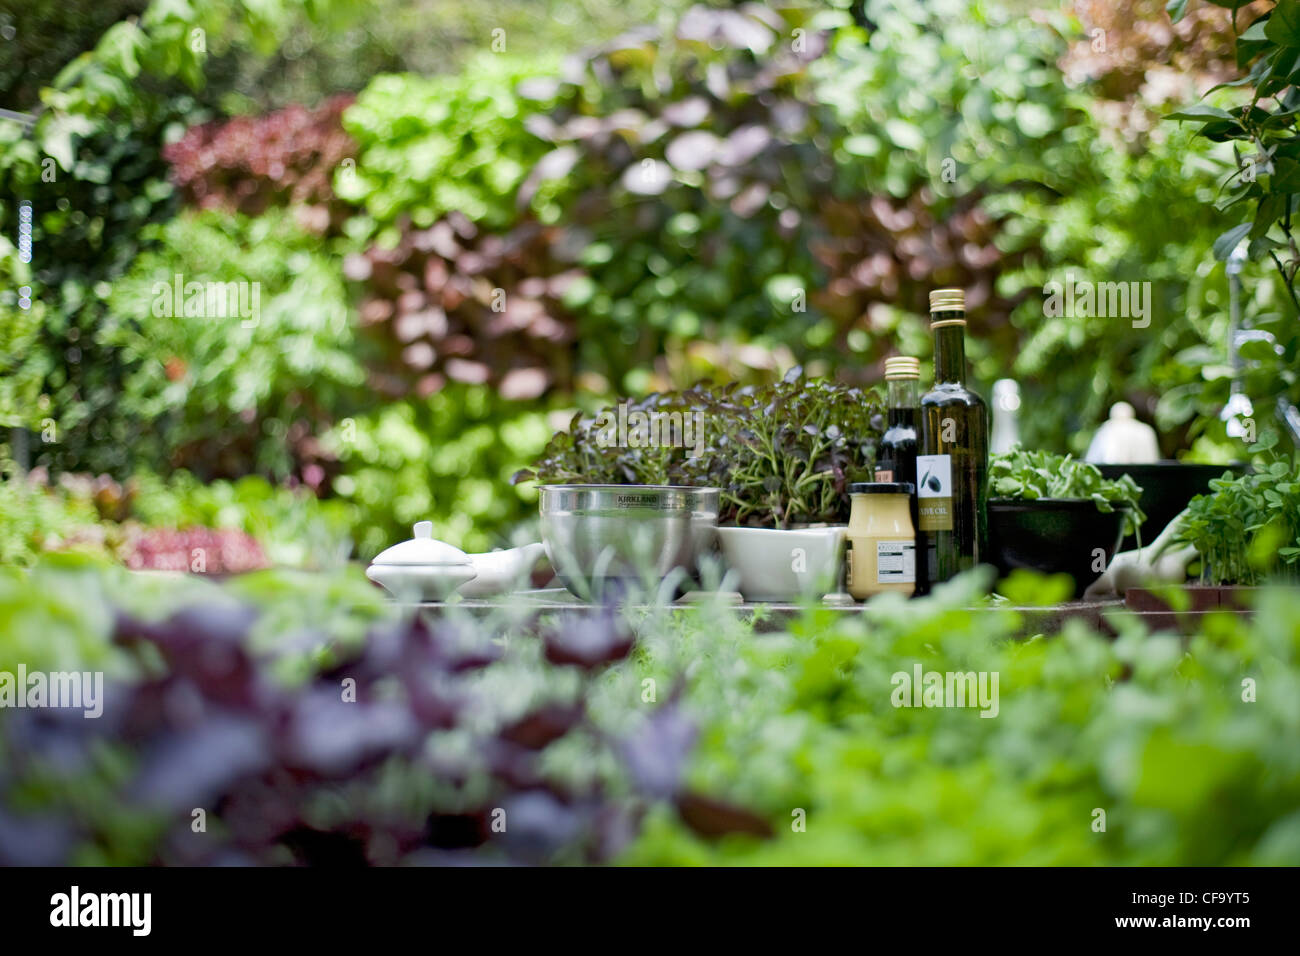 Chelsea Flower Show Detail Image Of Outdokitchen Herbs Bowls And